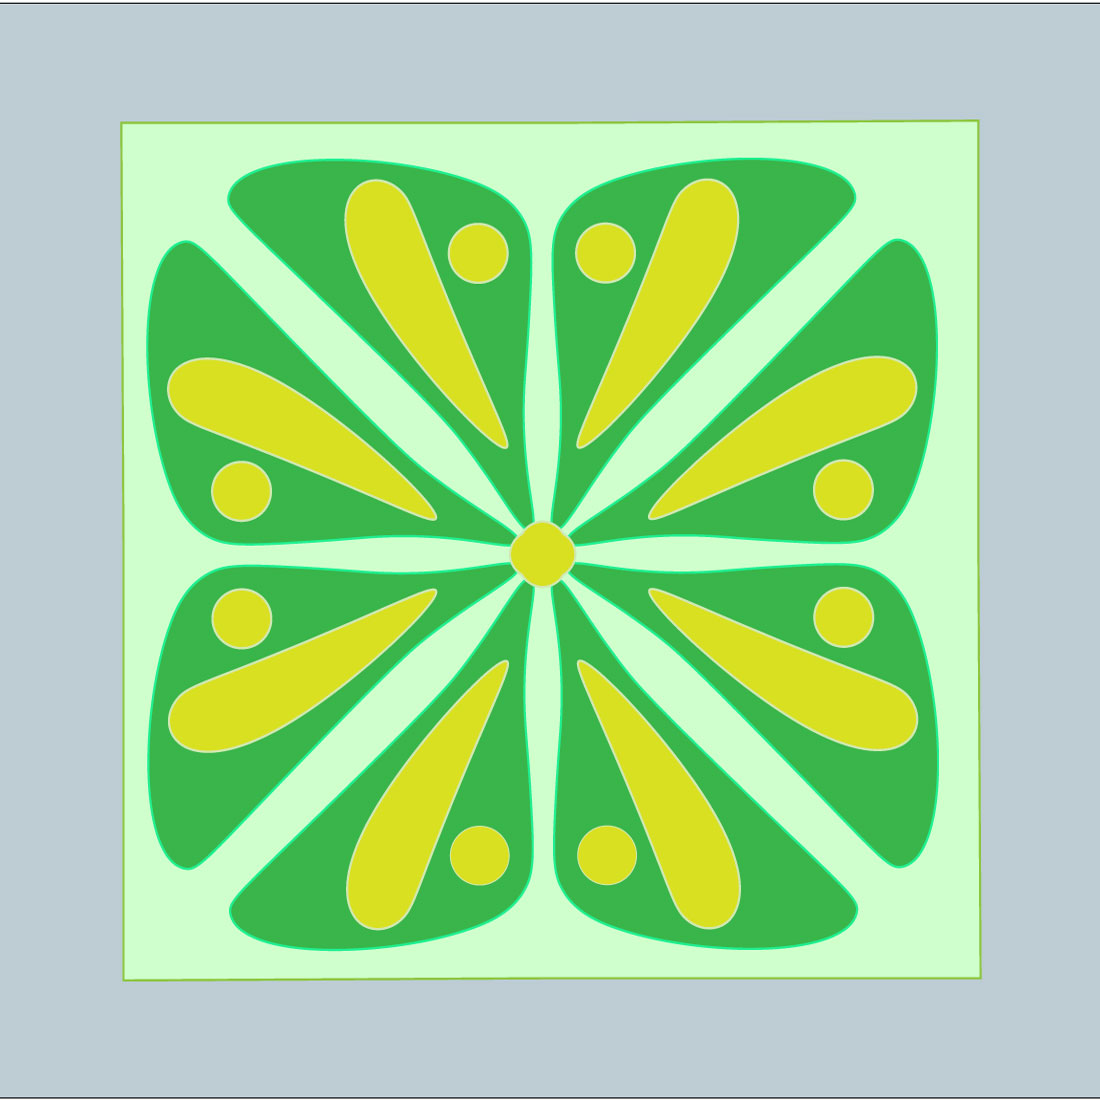 mandala art in light green background with yellow and green petals 1 624